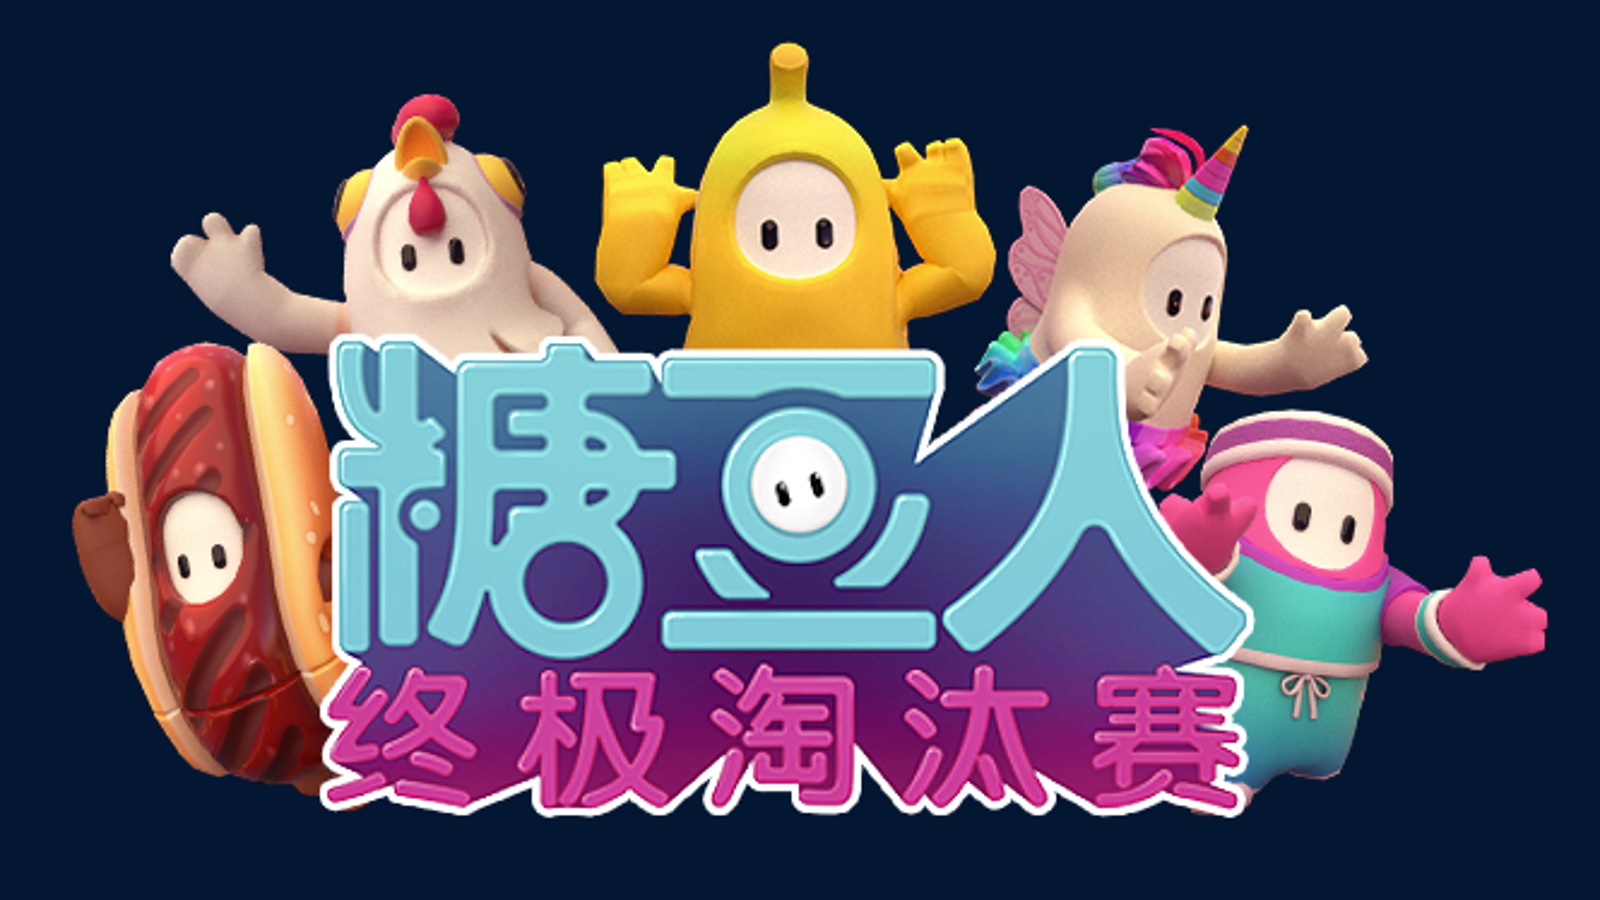 Report: Bilibili Secures Publishing Rights to Mobile Version of